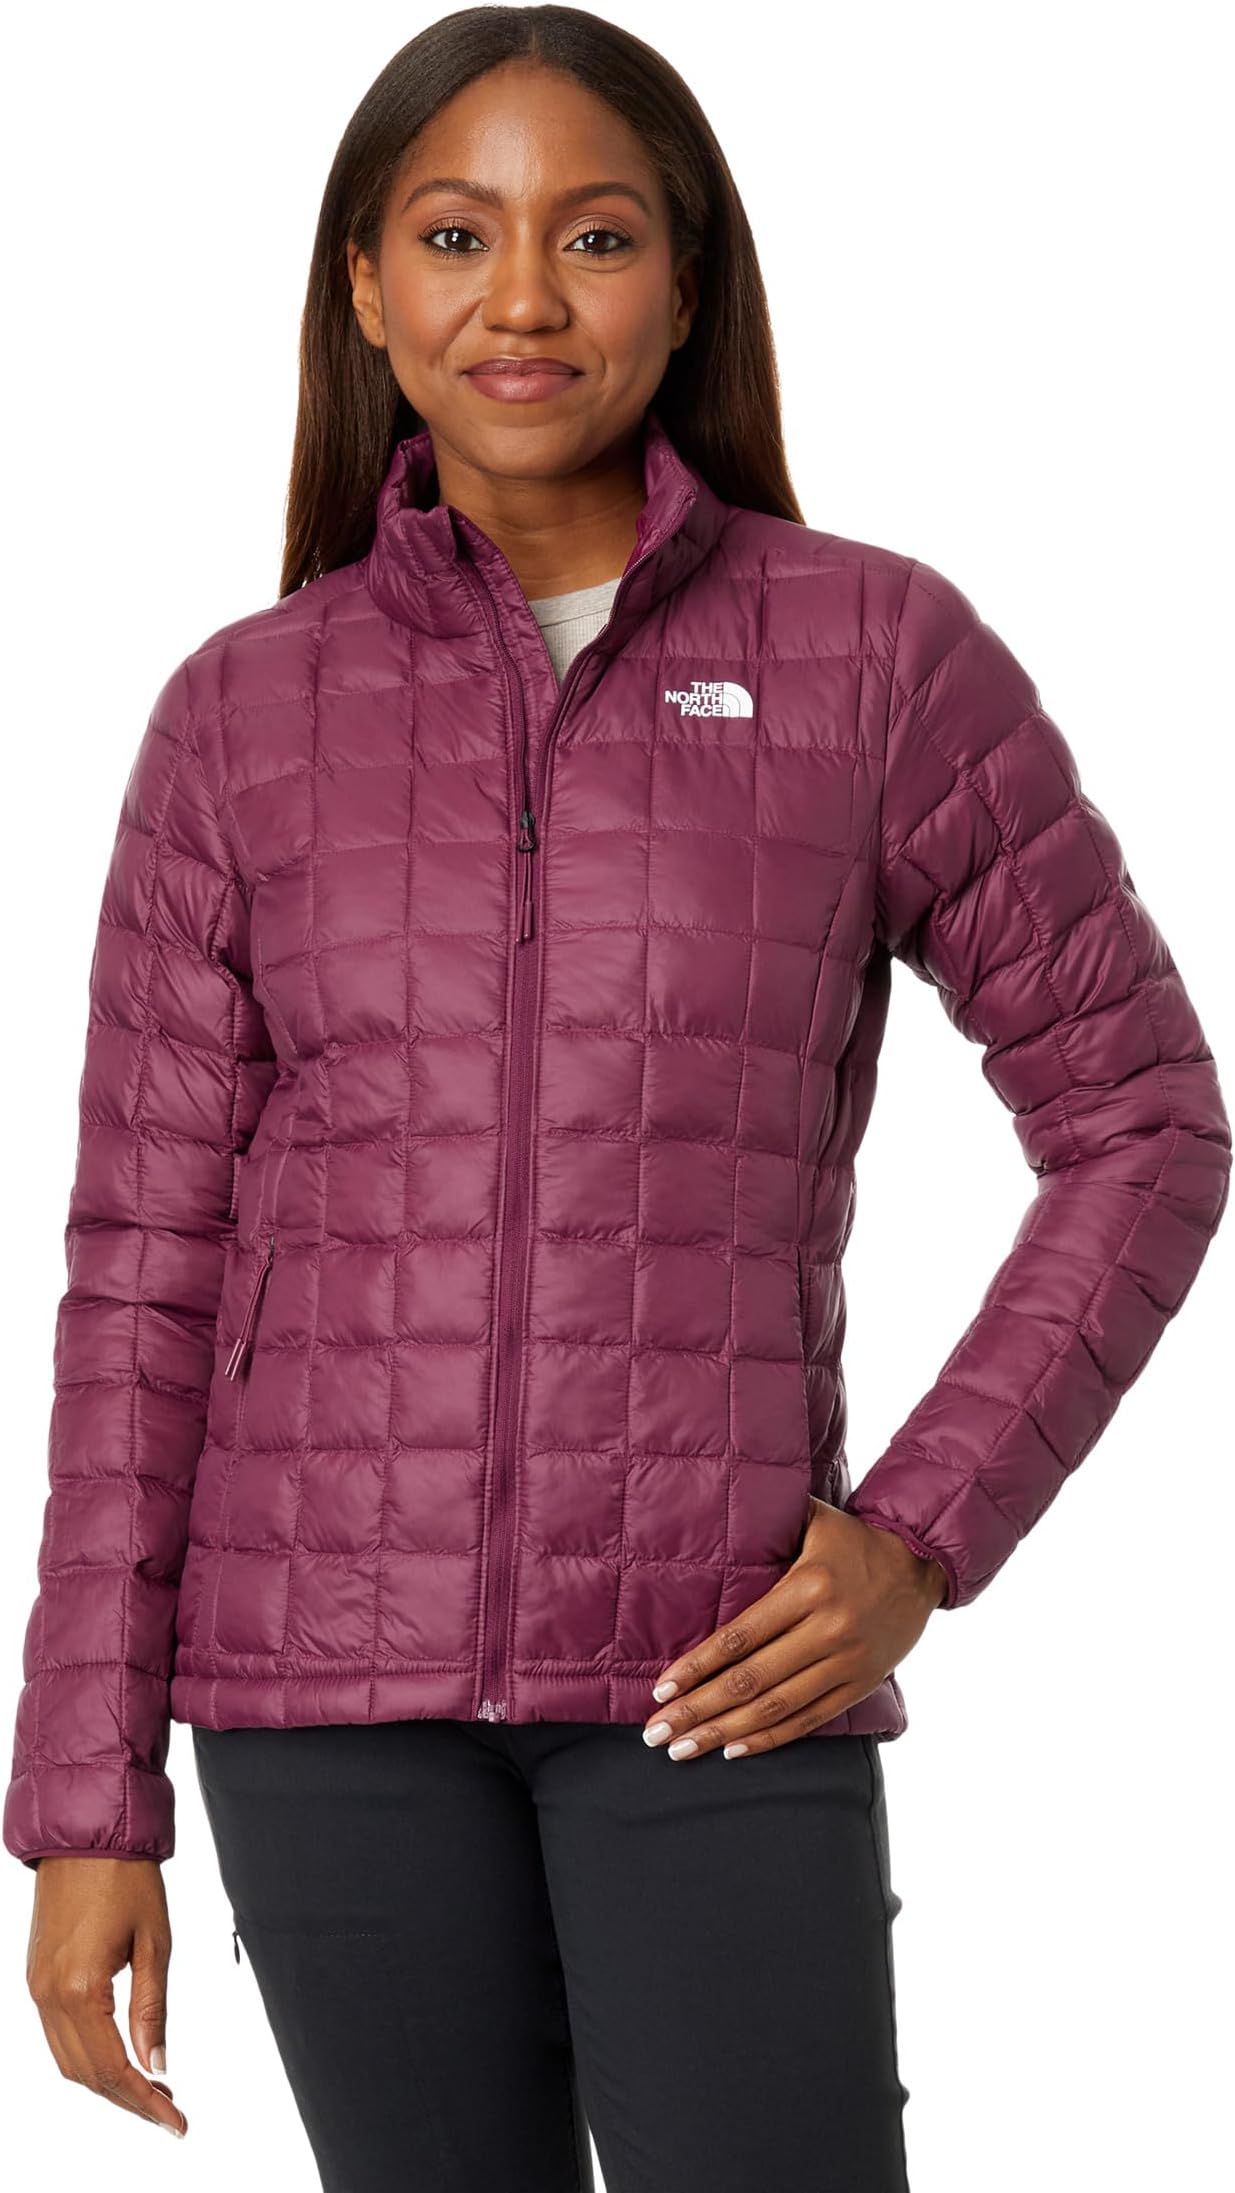 Эко-куртка ThermoBall The North Face, цвет Boysenberry куртка the north face thermoball eco 2 0 plus цвет boysenberry